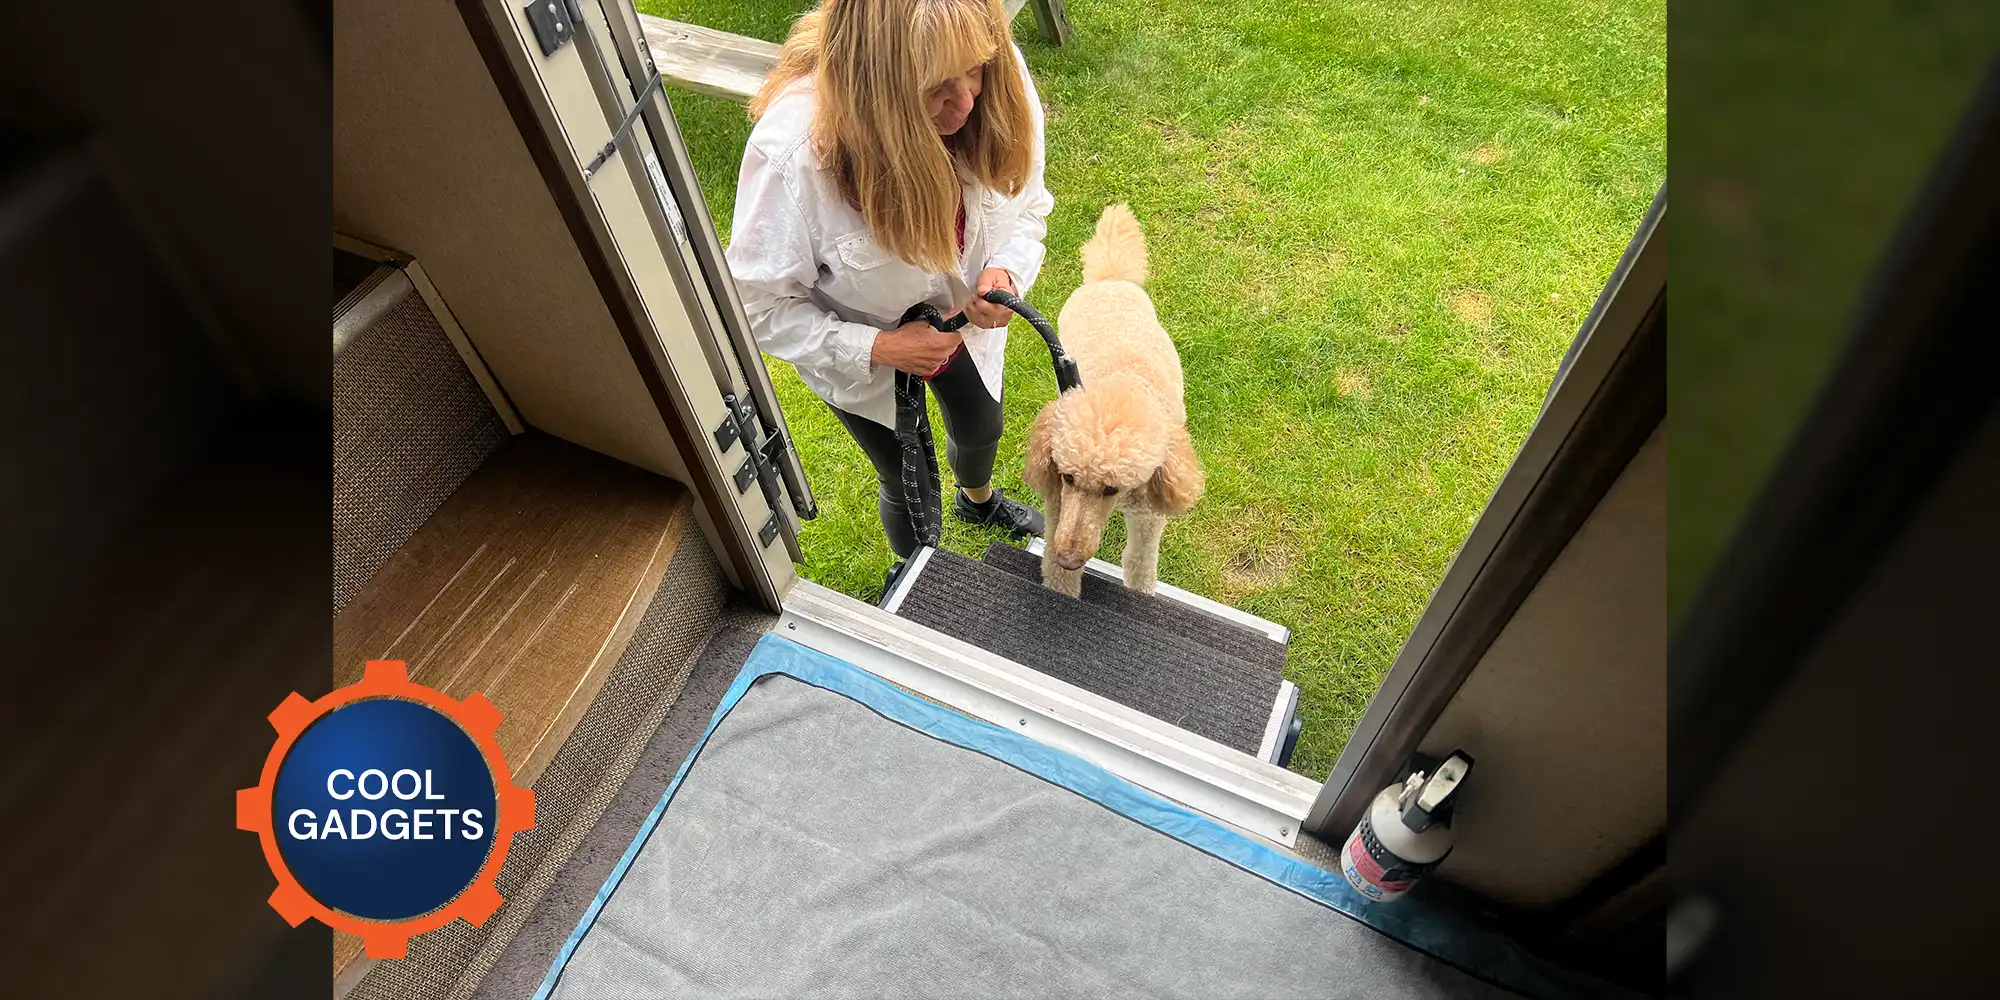 a woman holds a leash fastened to a full size blonde standard poodle as they both go up the entry steps of an RV parked on grass